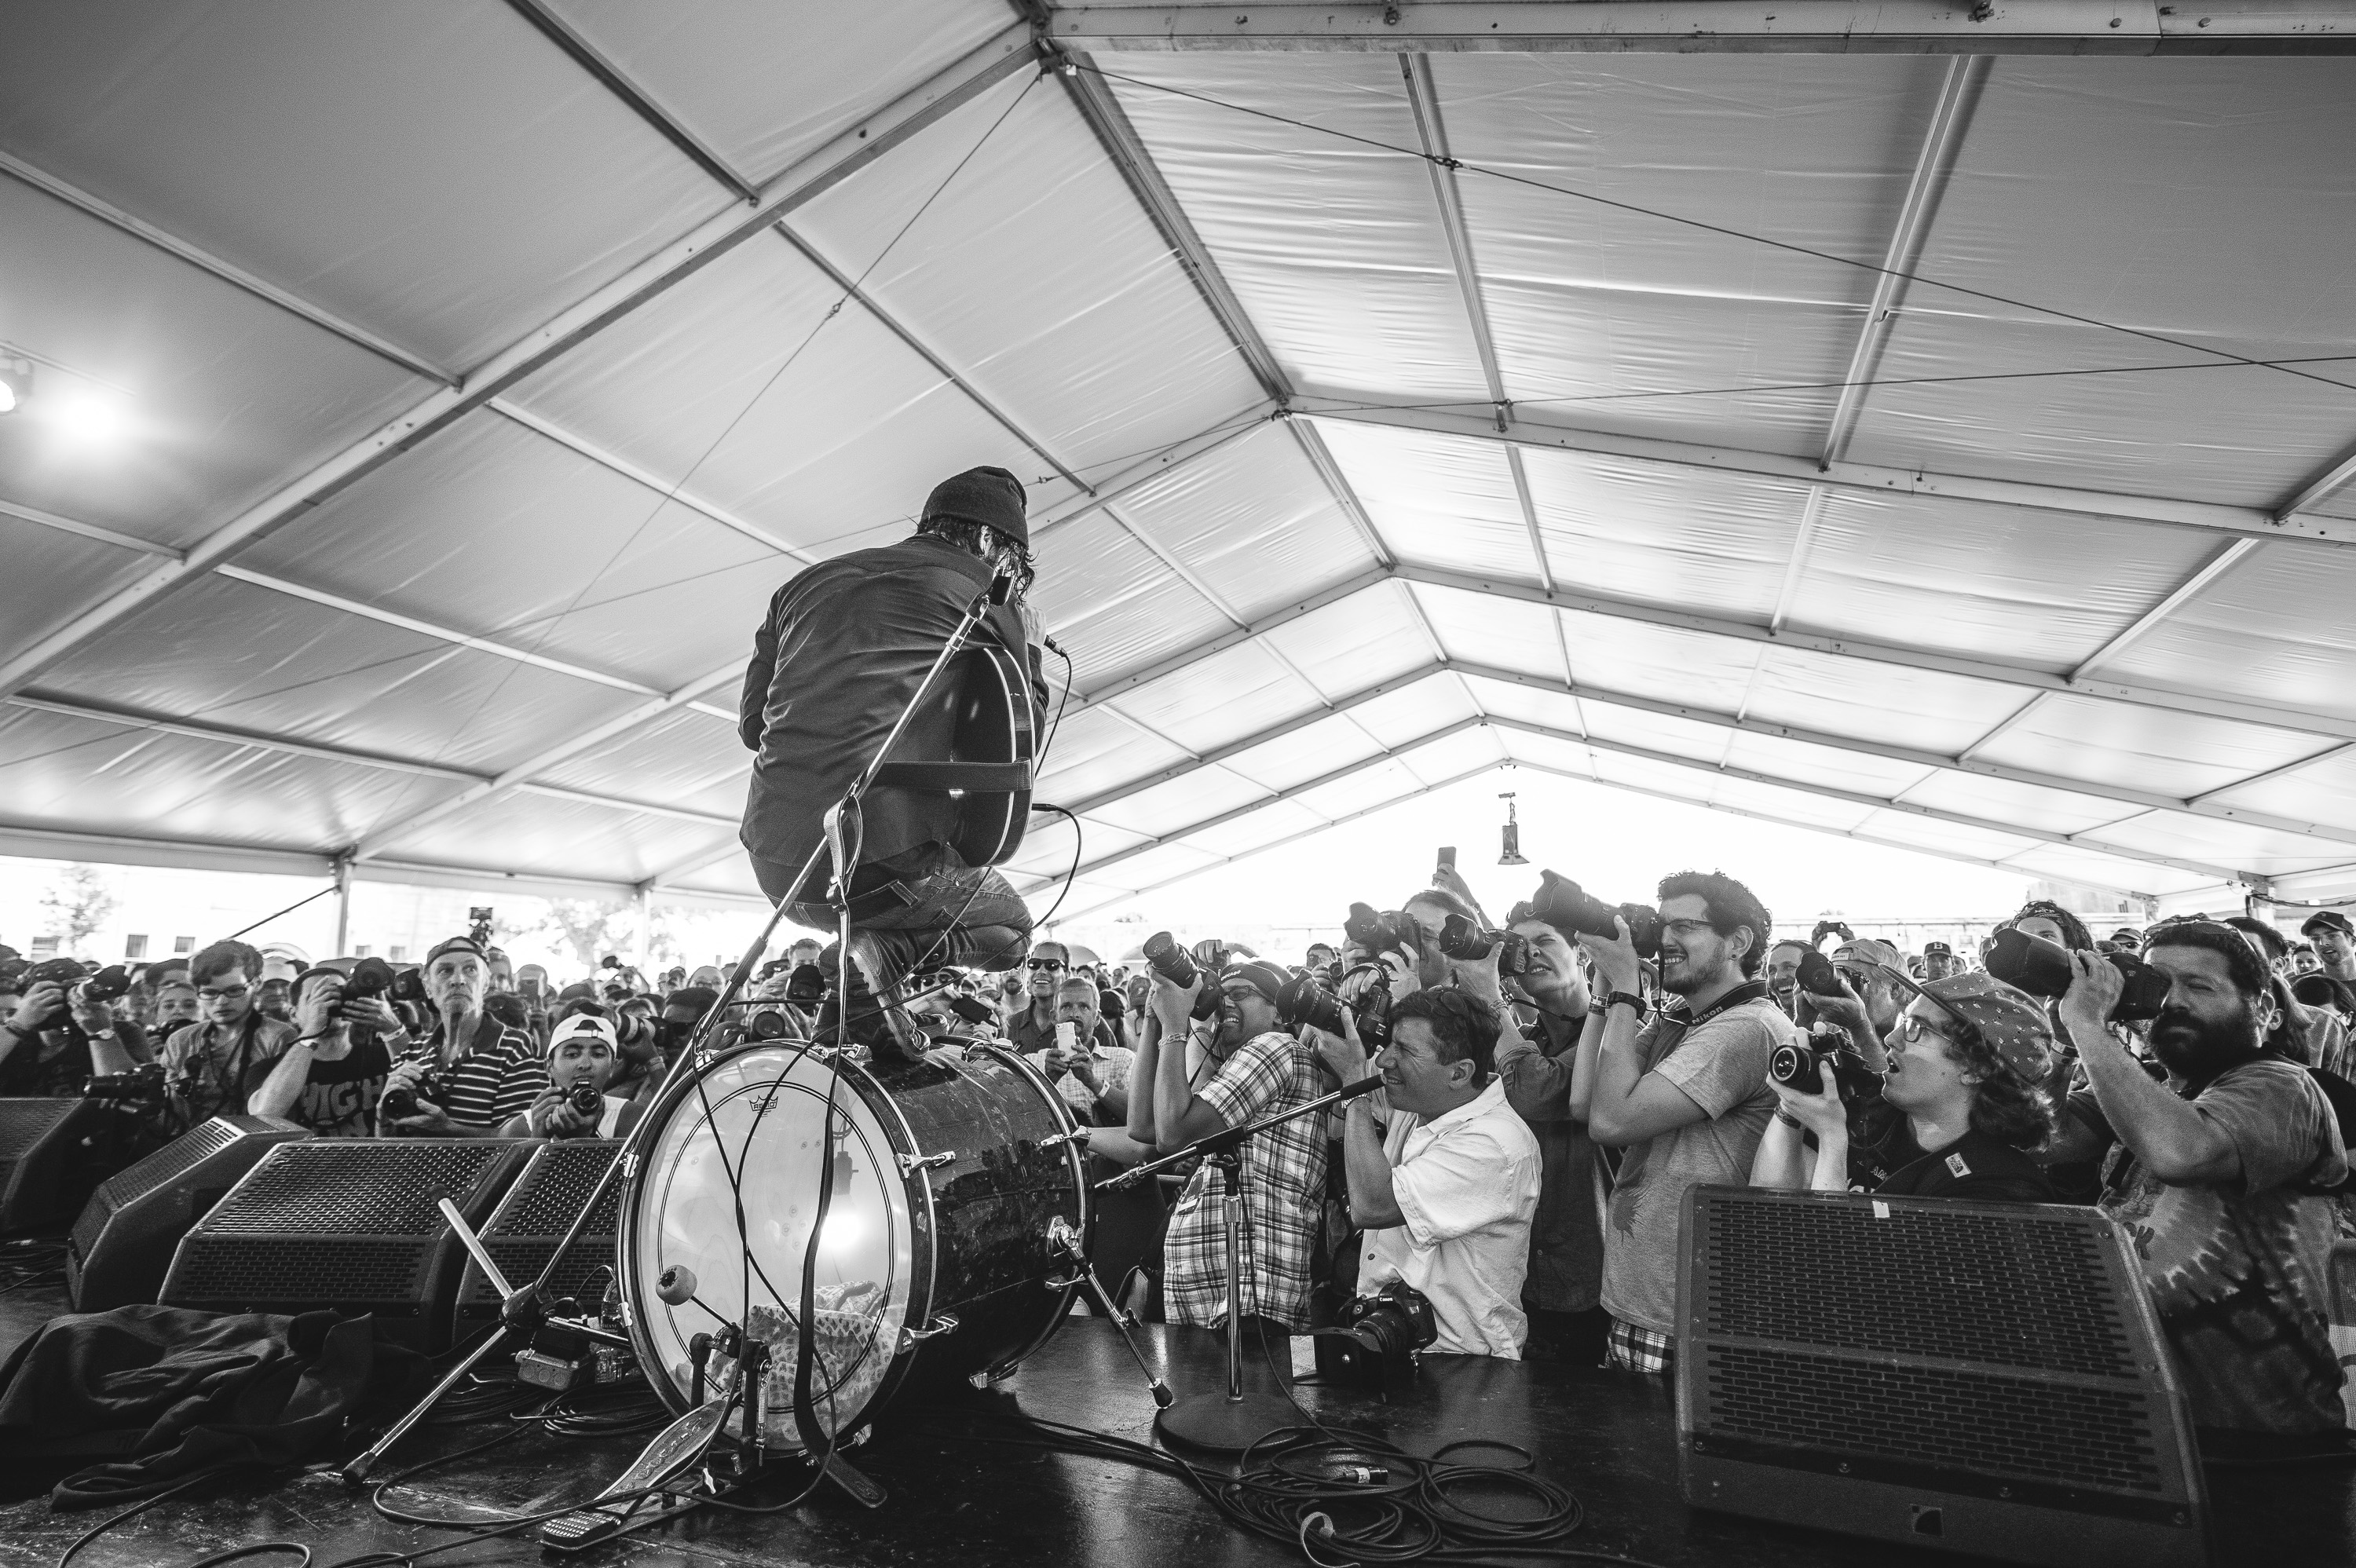 Reignwolf performs at the 2014 Newport Folk Festival